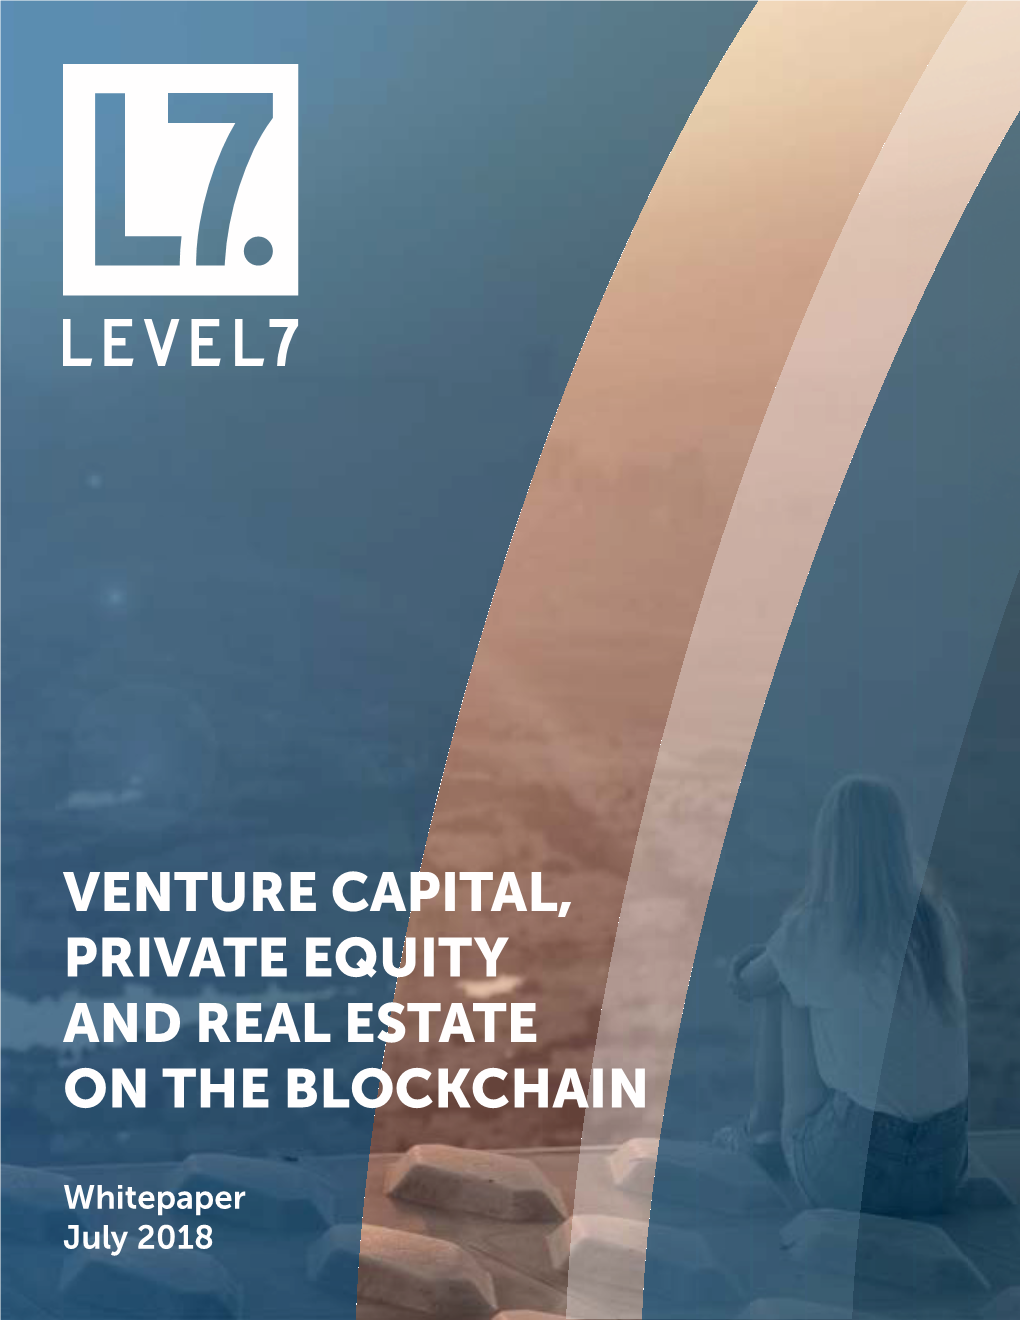 Venture Capital, Private Equity and Real Estate on the Blockchain